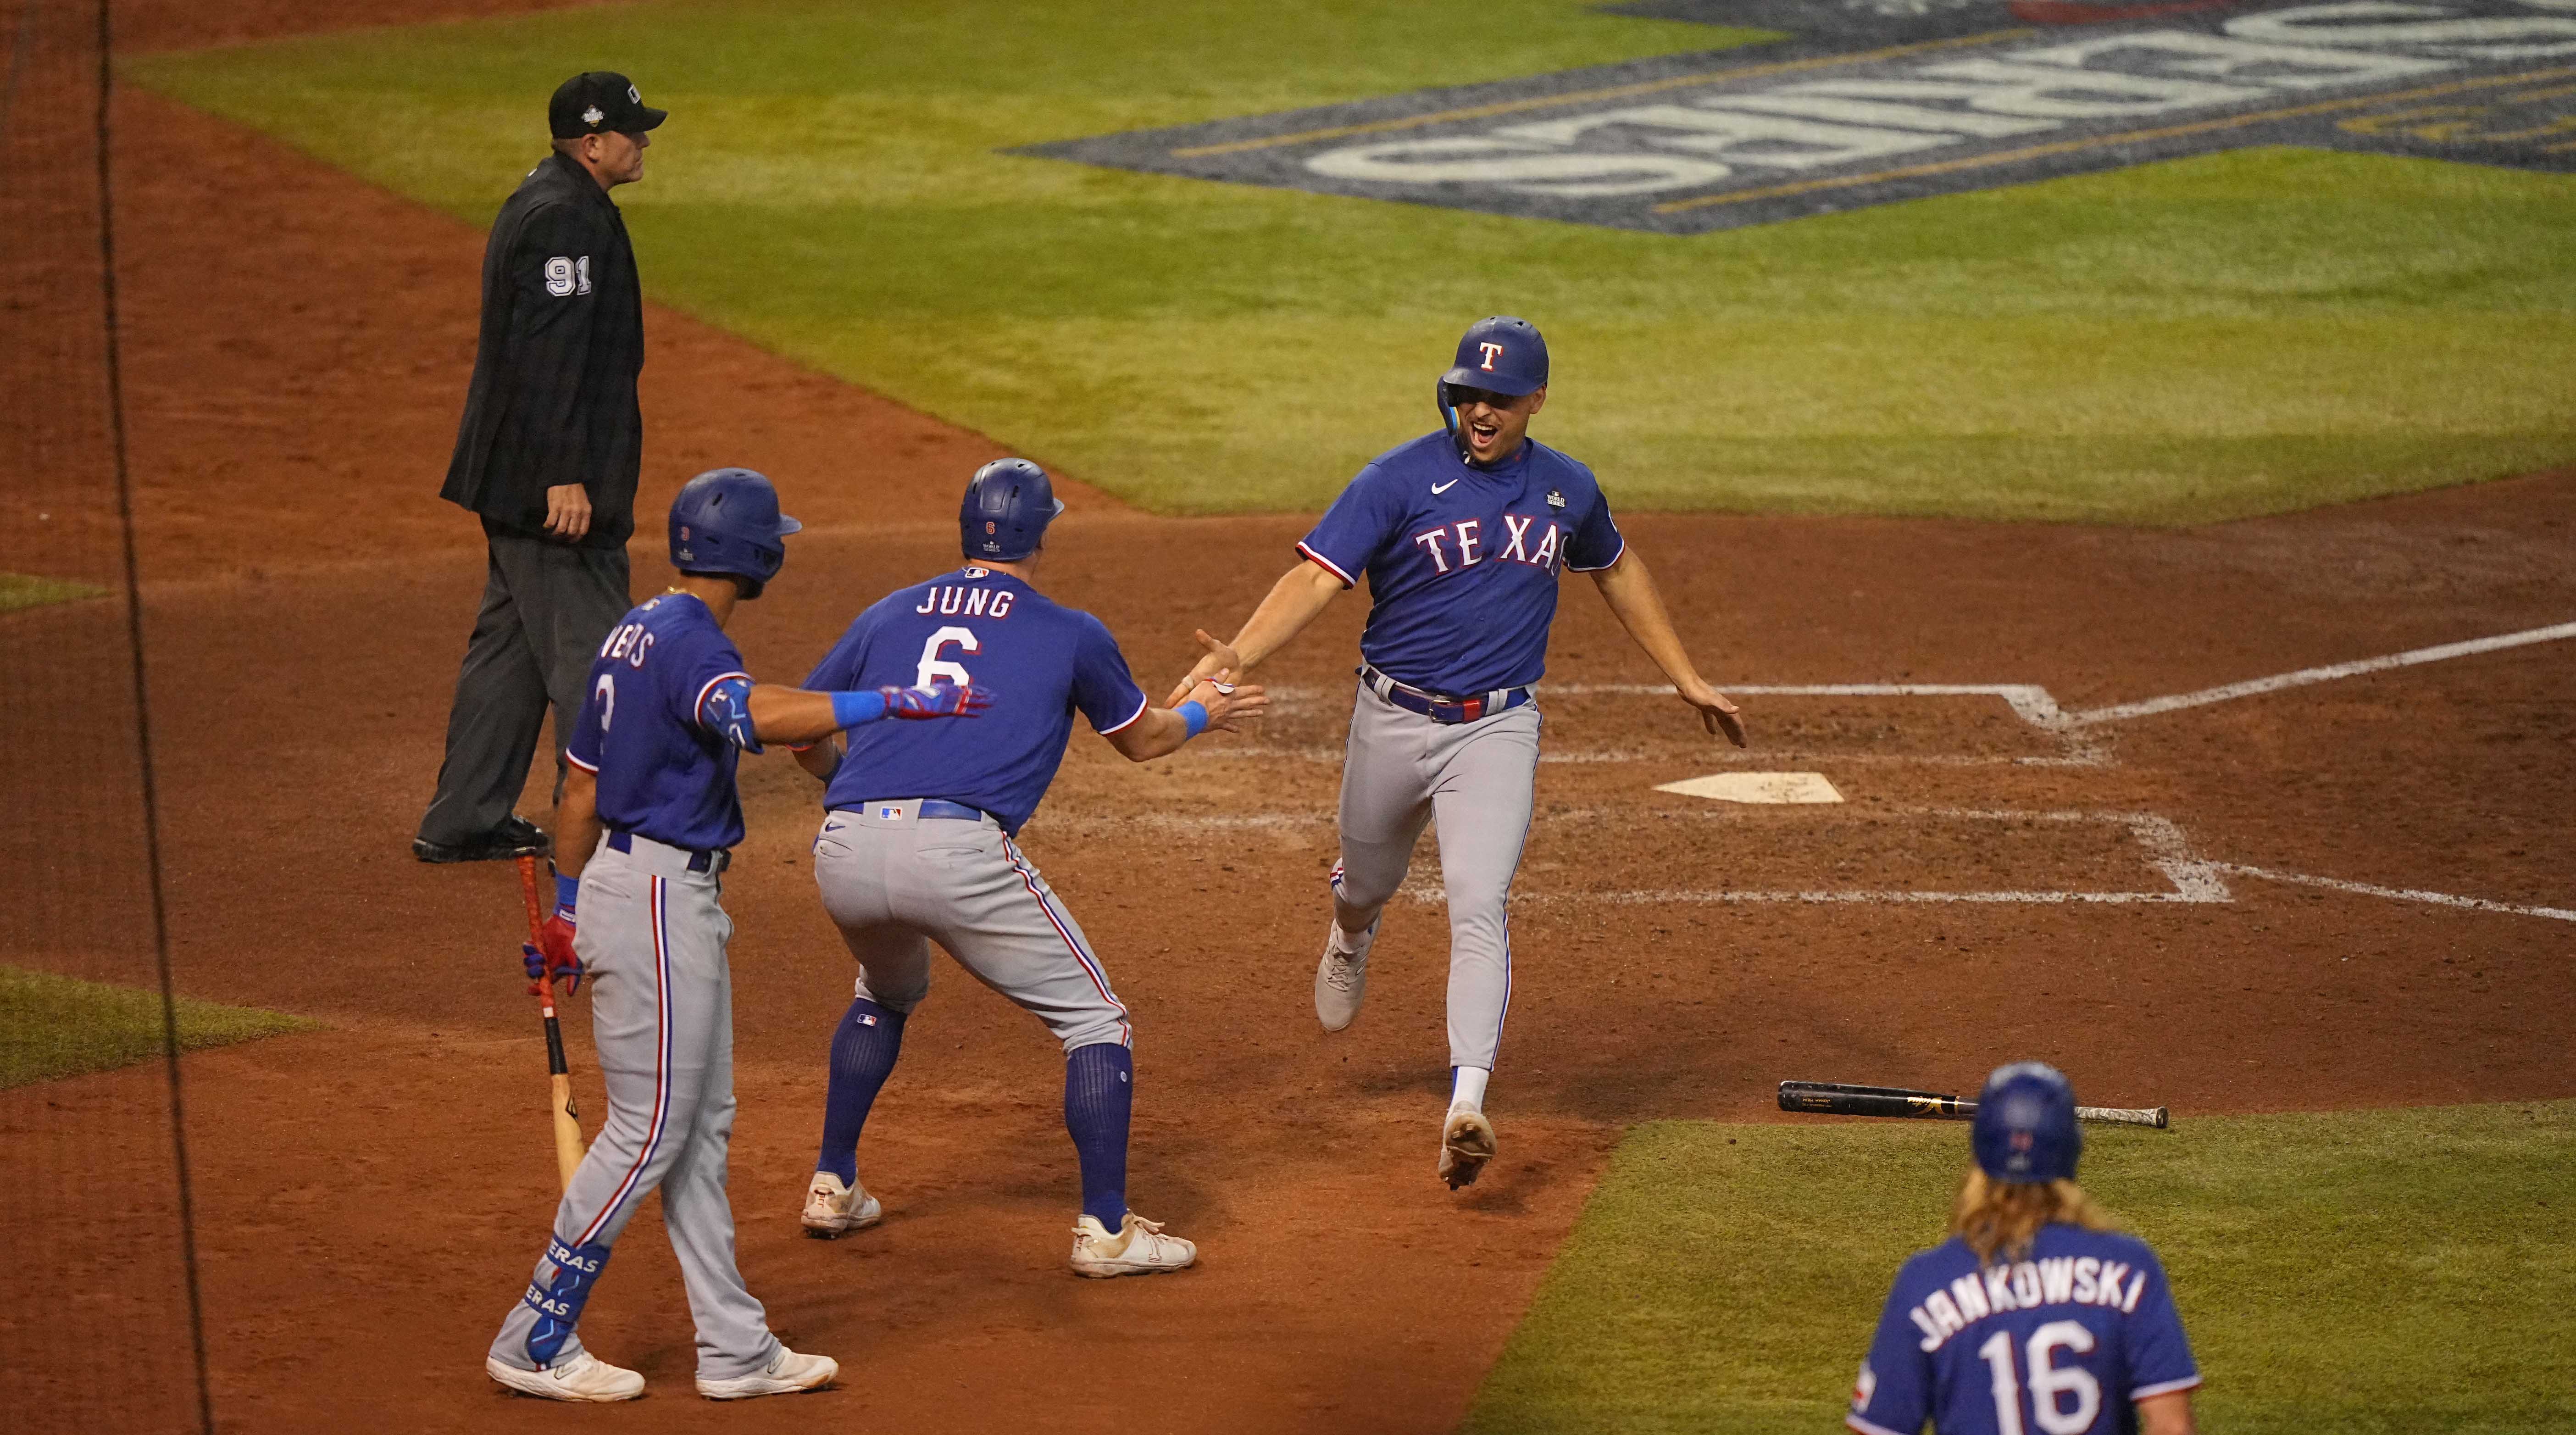 The Rangers scoring in the ninth inning.